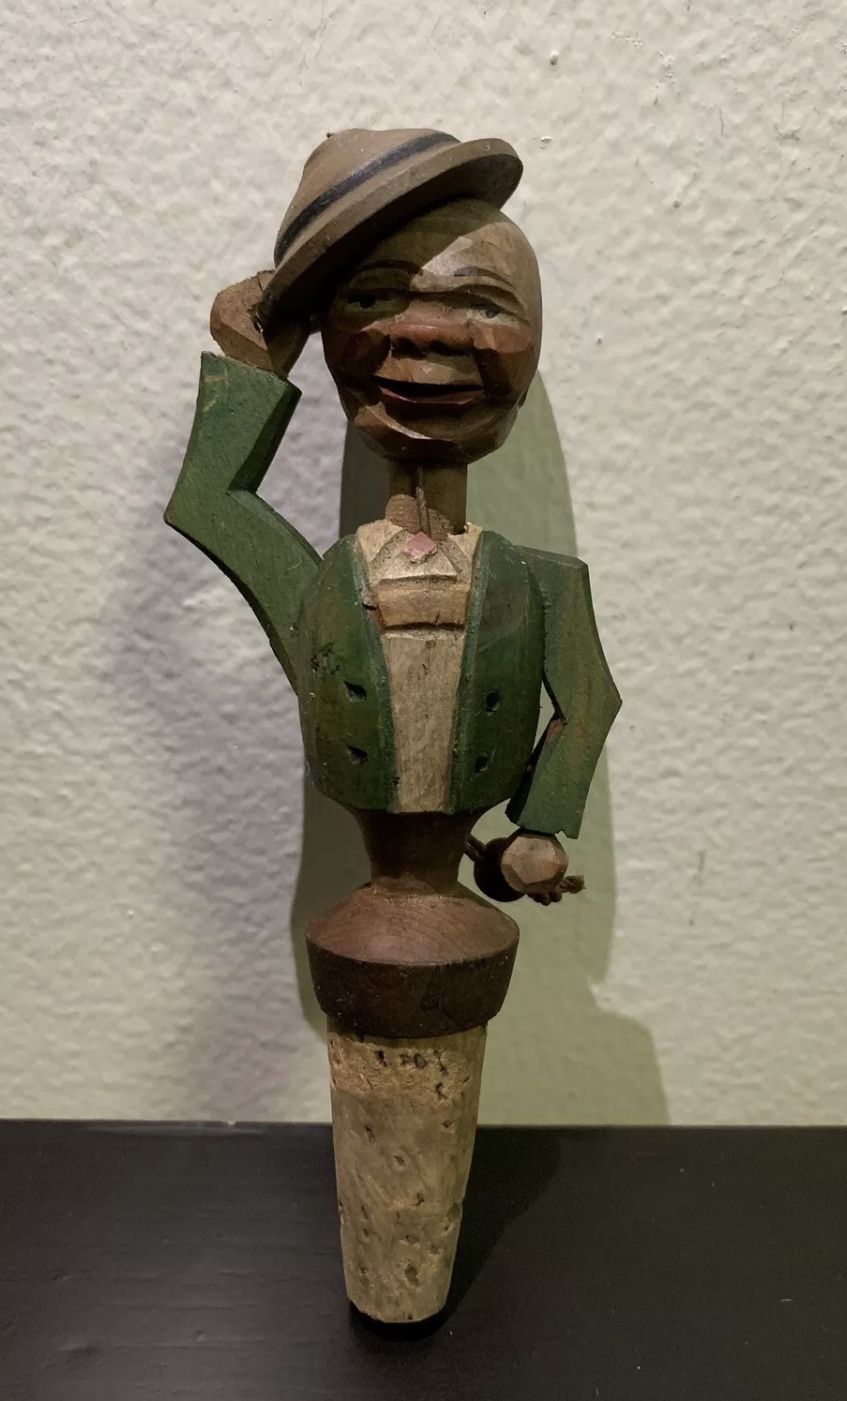 Antique ANRI Mechanical Wine Bottle Cork Stopper Man With Hat, Working